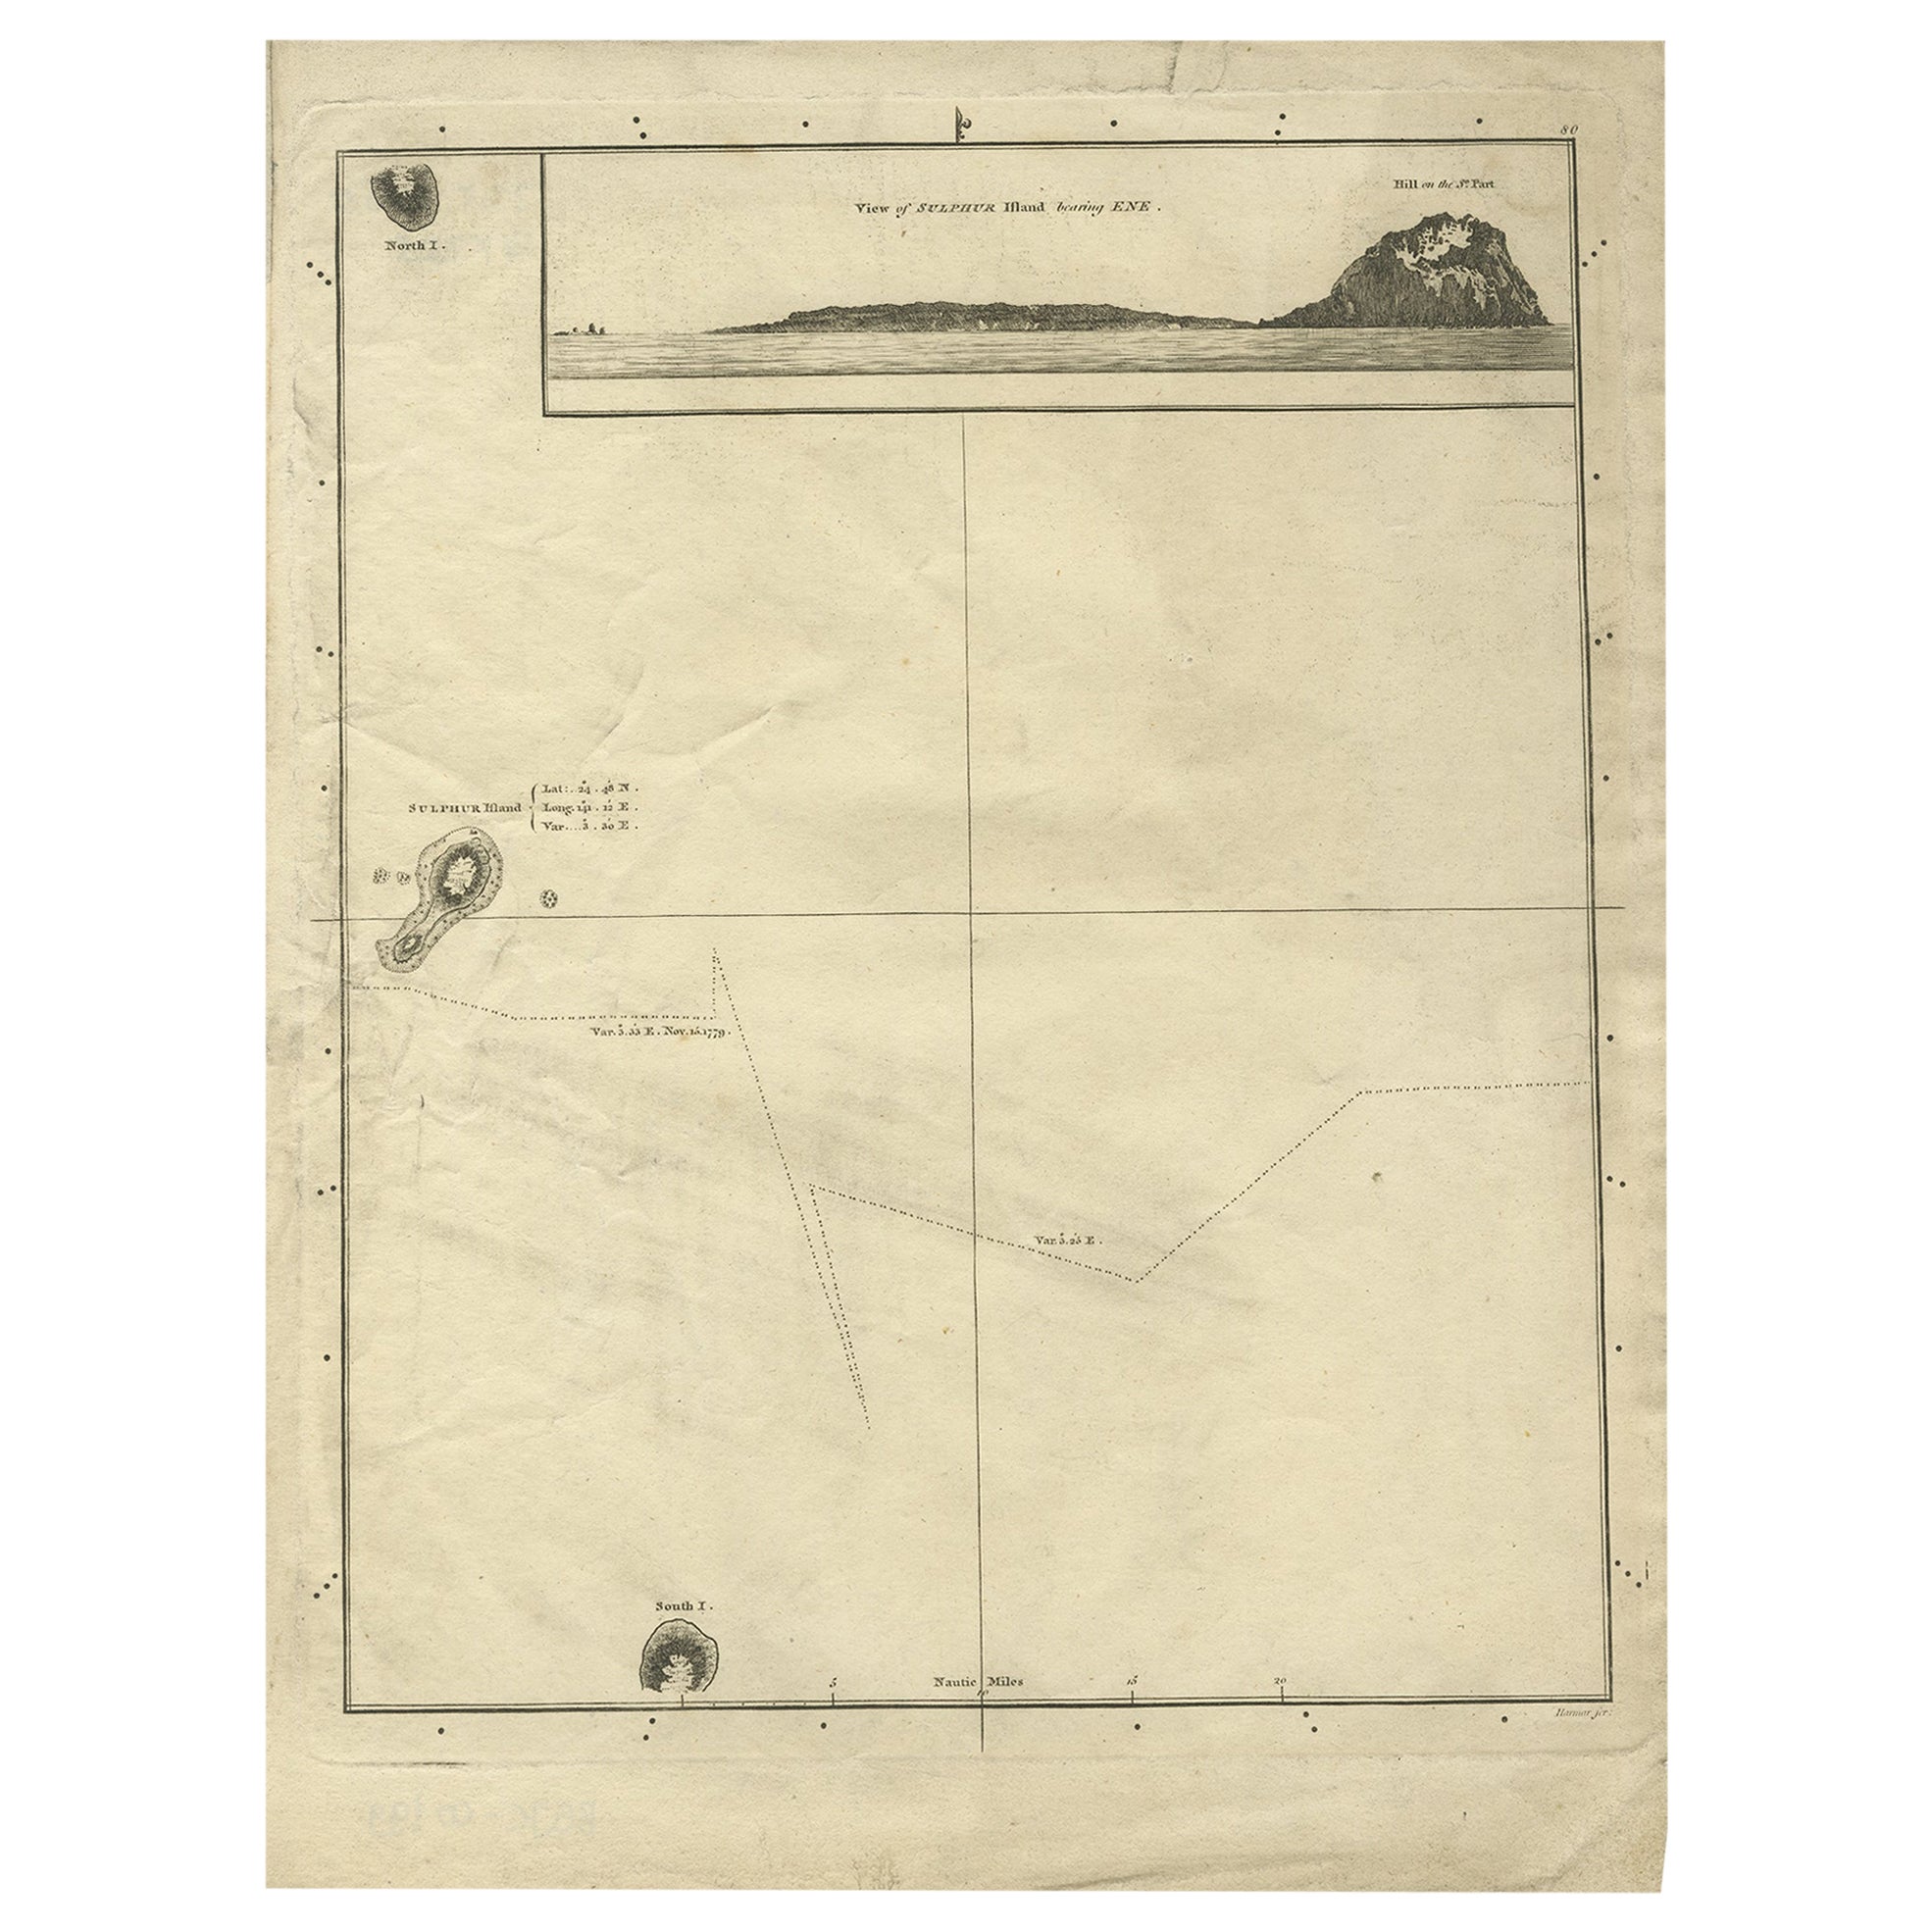 Antique Map of Suffren Island by Cook, 1784